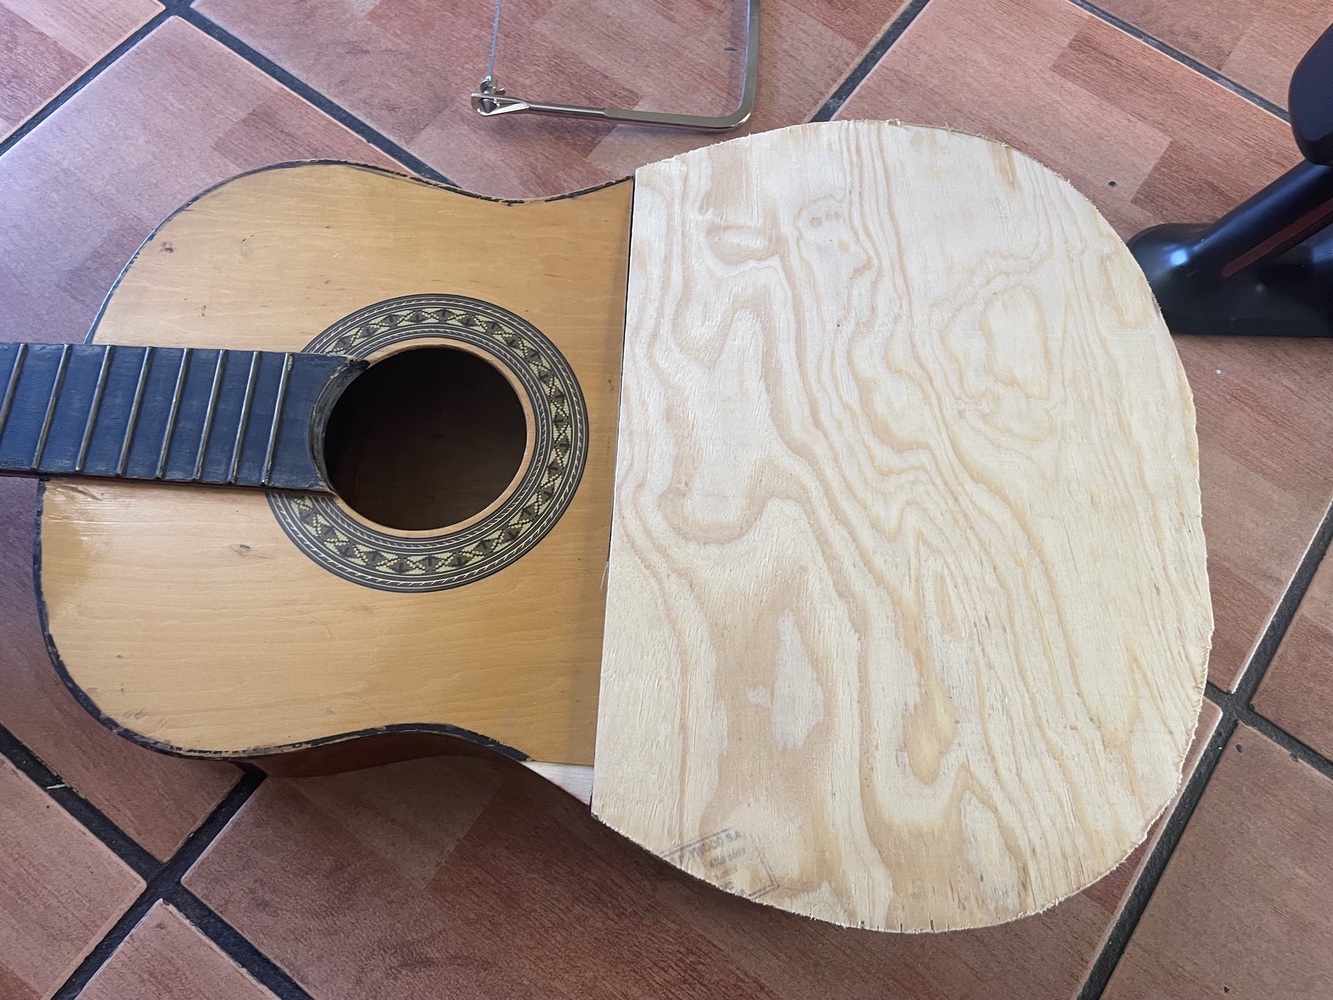 The guitar with it's new plywood top"